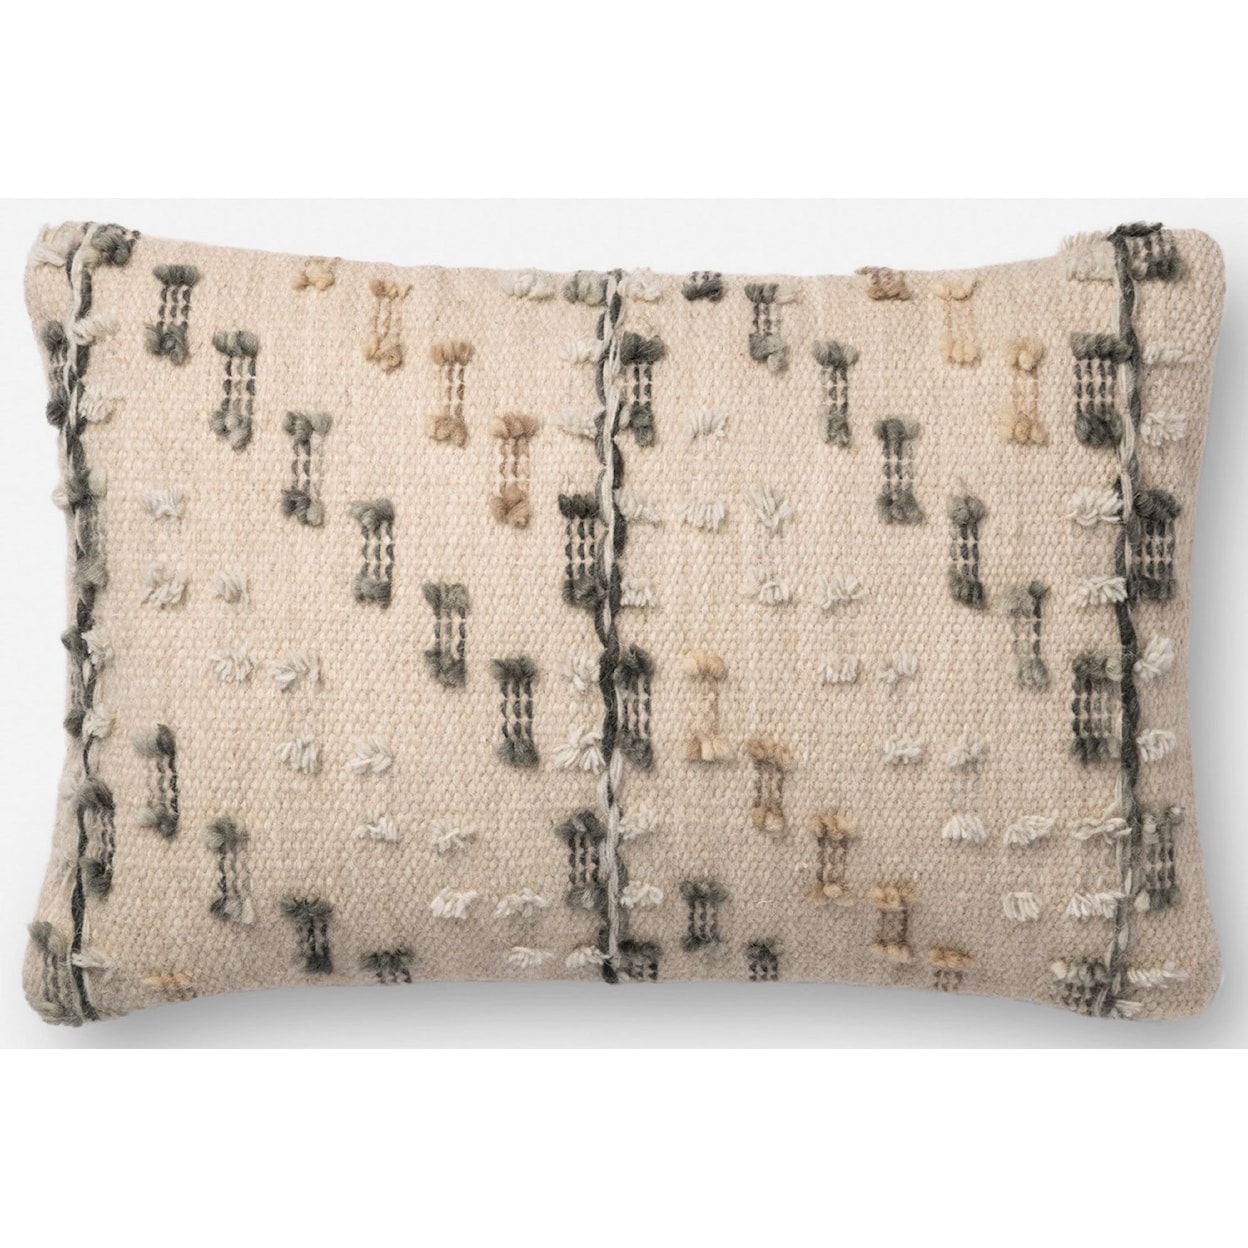 Magnolia Home by Joanna Gaines for Loloi Accent Pillows 13" x 21" Down Pillow